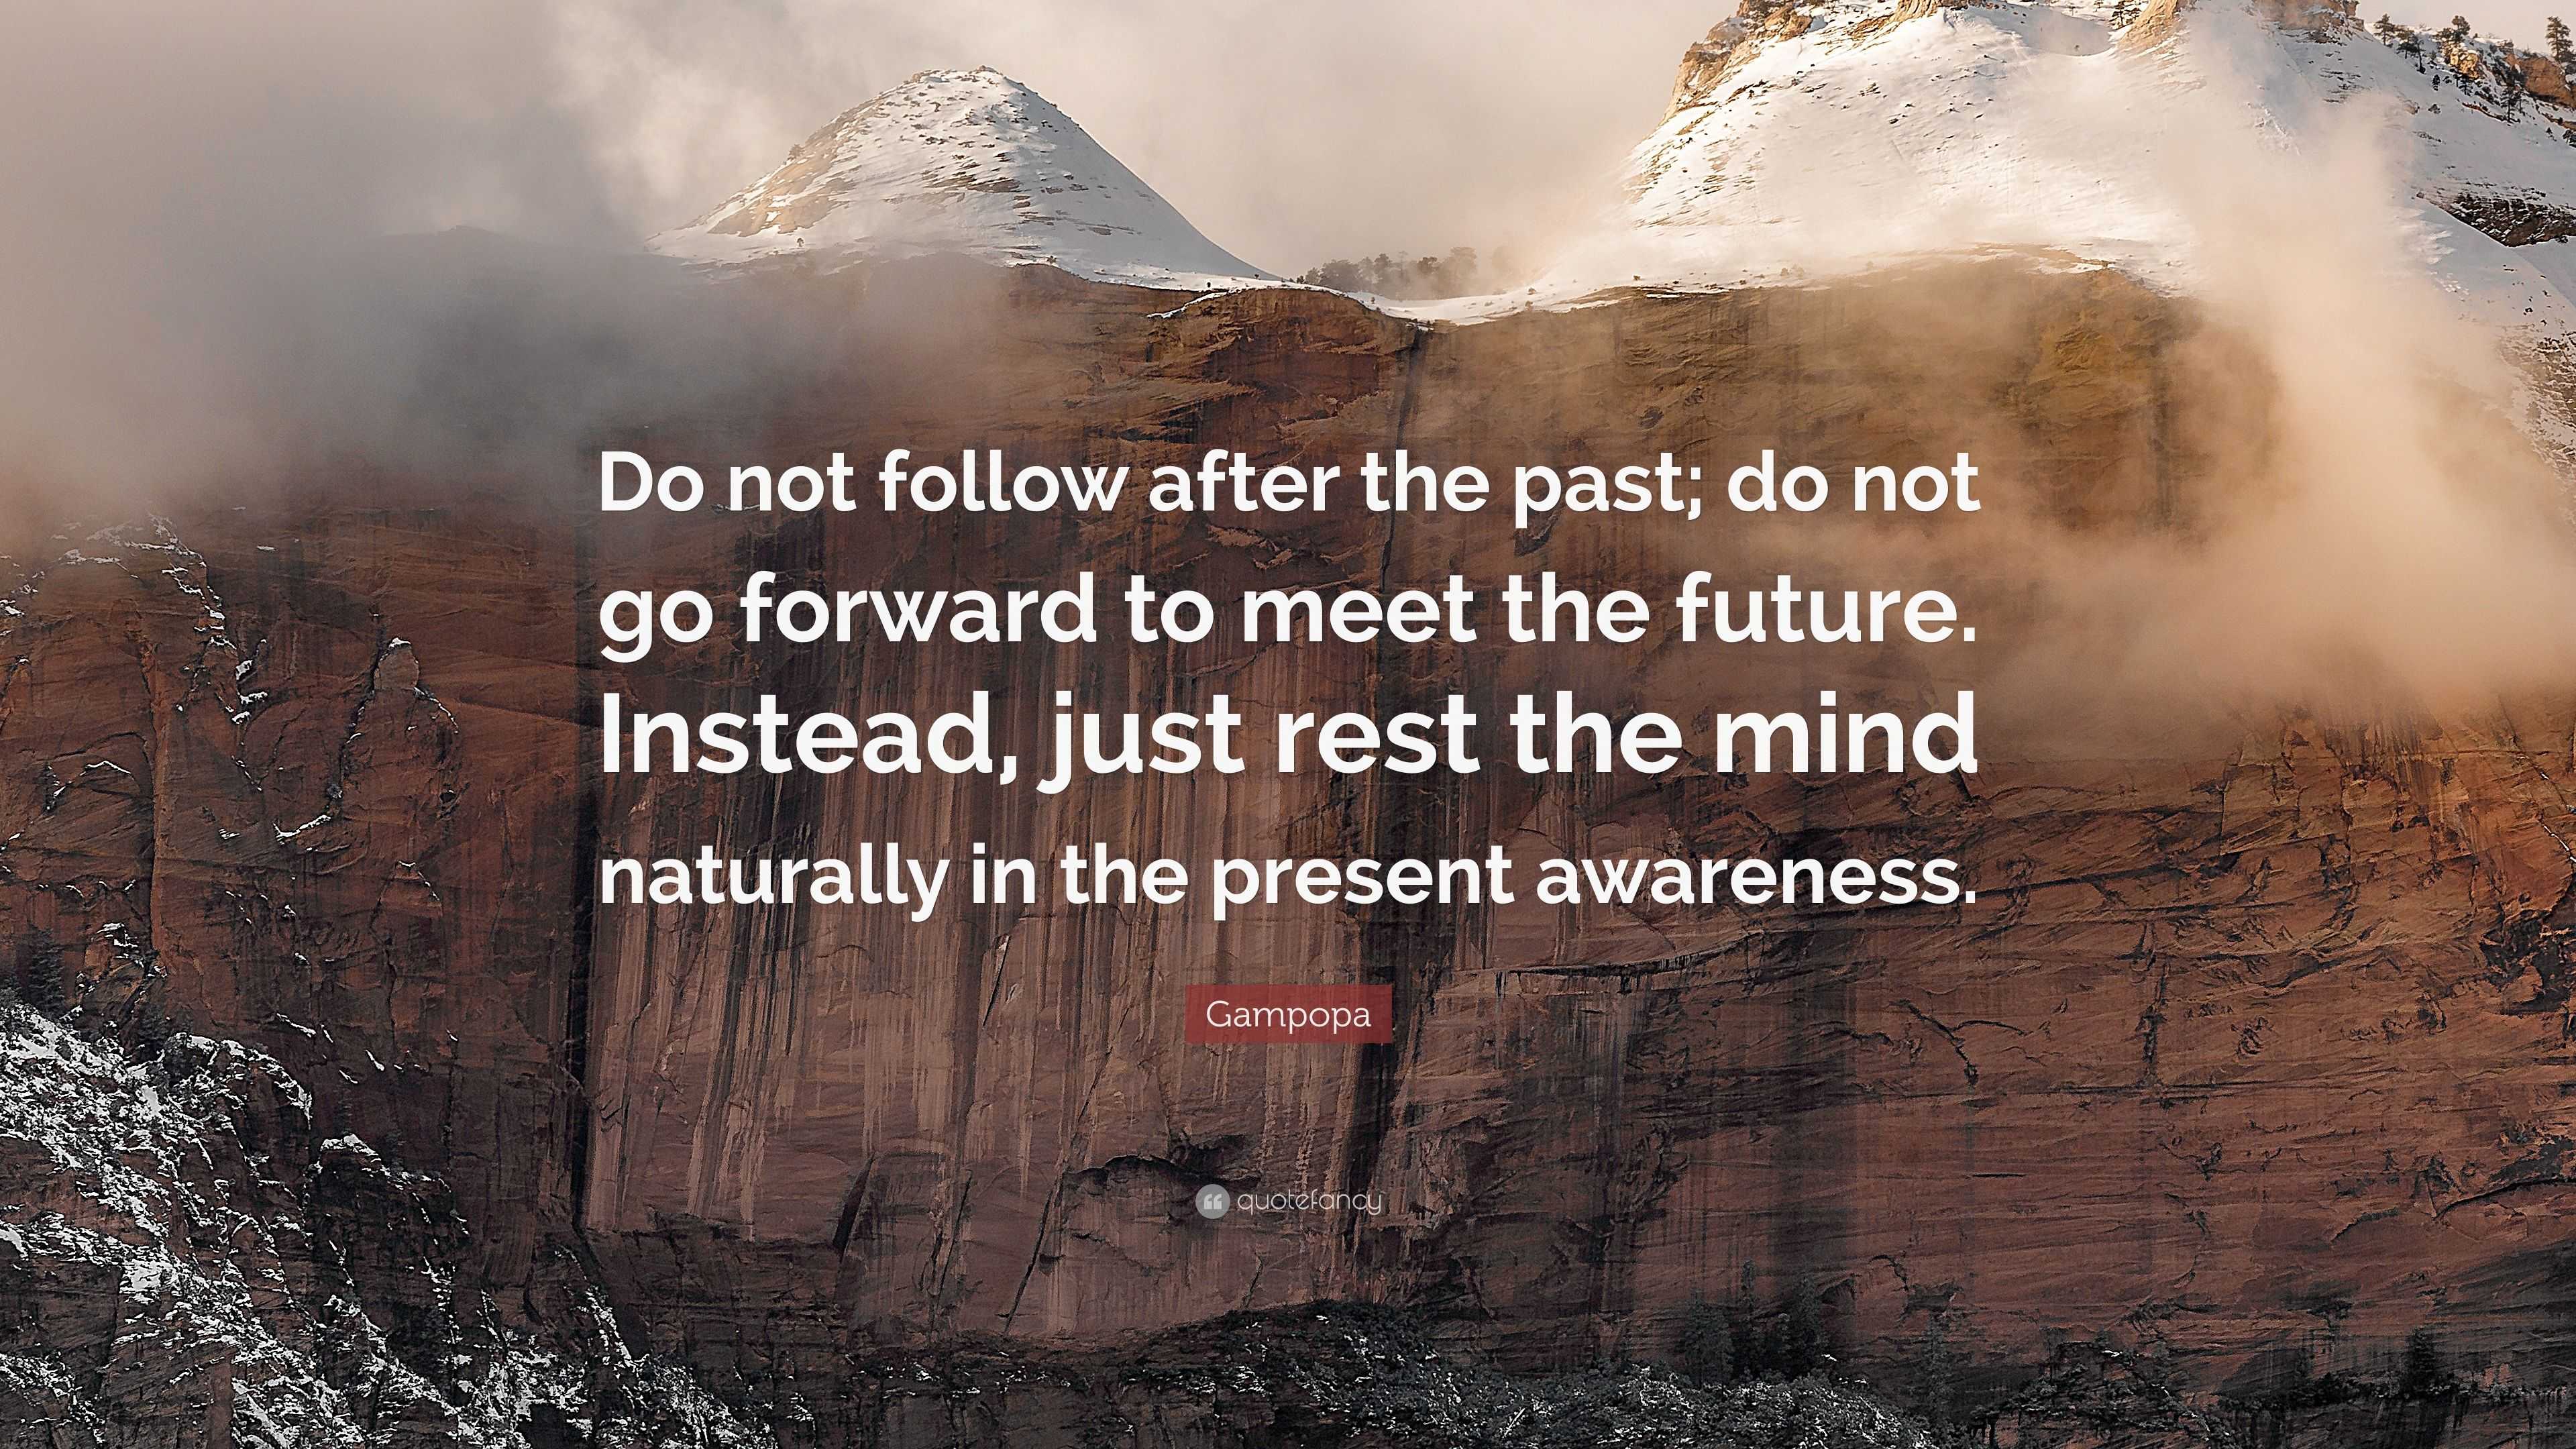 Gampopa Quote: “Do not follow after the past; do not go forward to meet ...